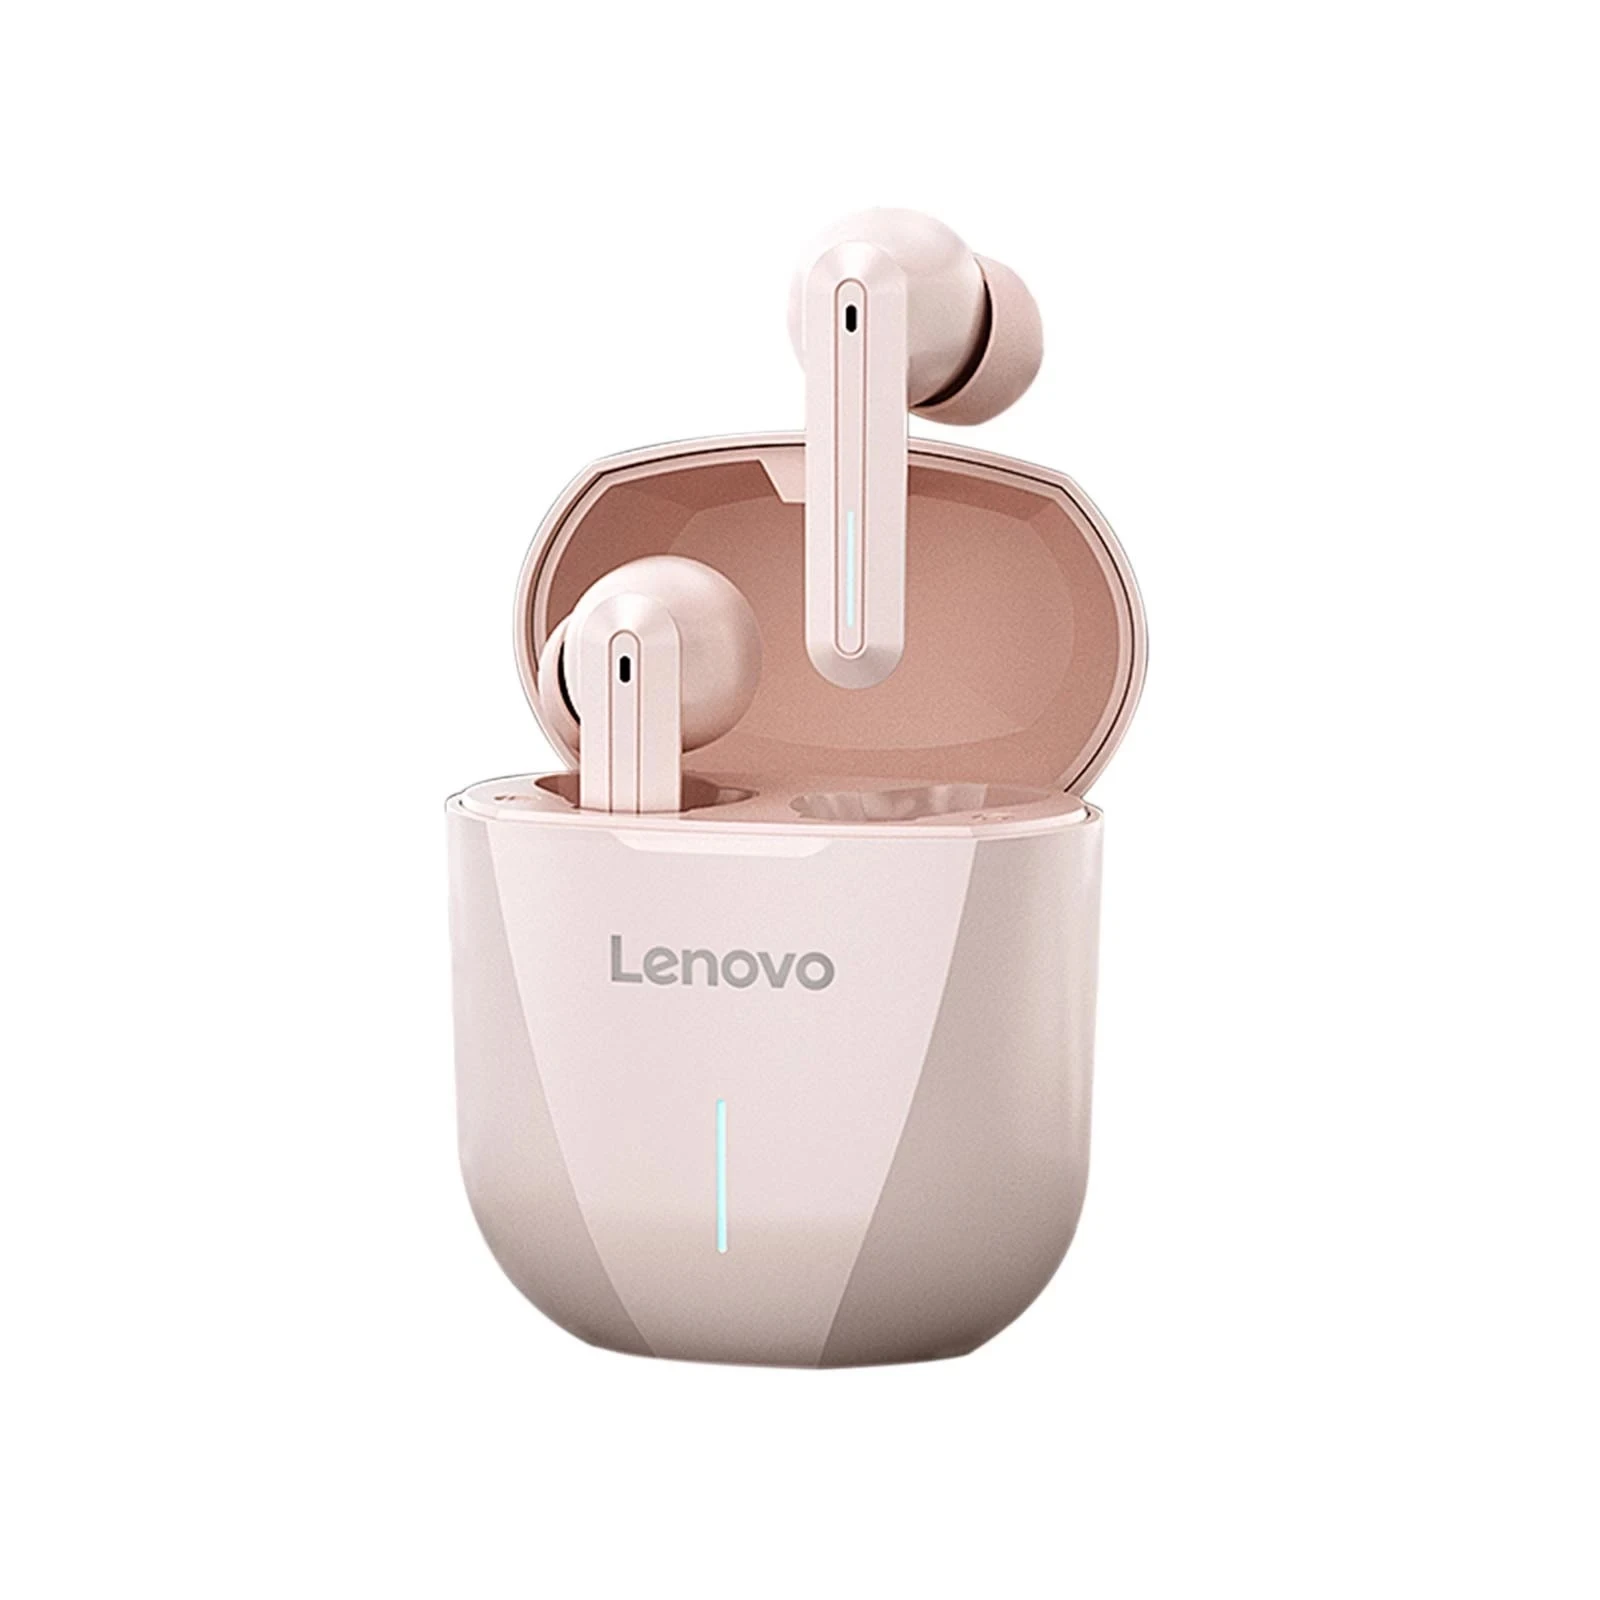 Lenovo XG01 TWS Earphones Wireless Bluetooth 5.0 Headphone Gaming Headsets HiFi Sound Built-in Mic Earbuds with LED Light